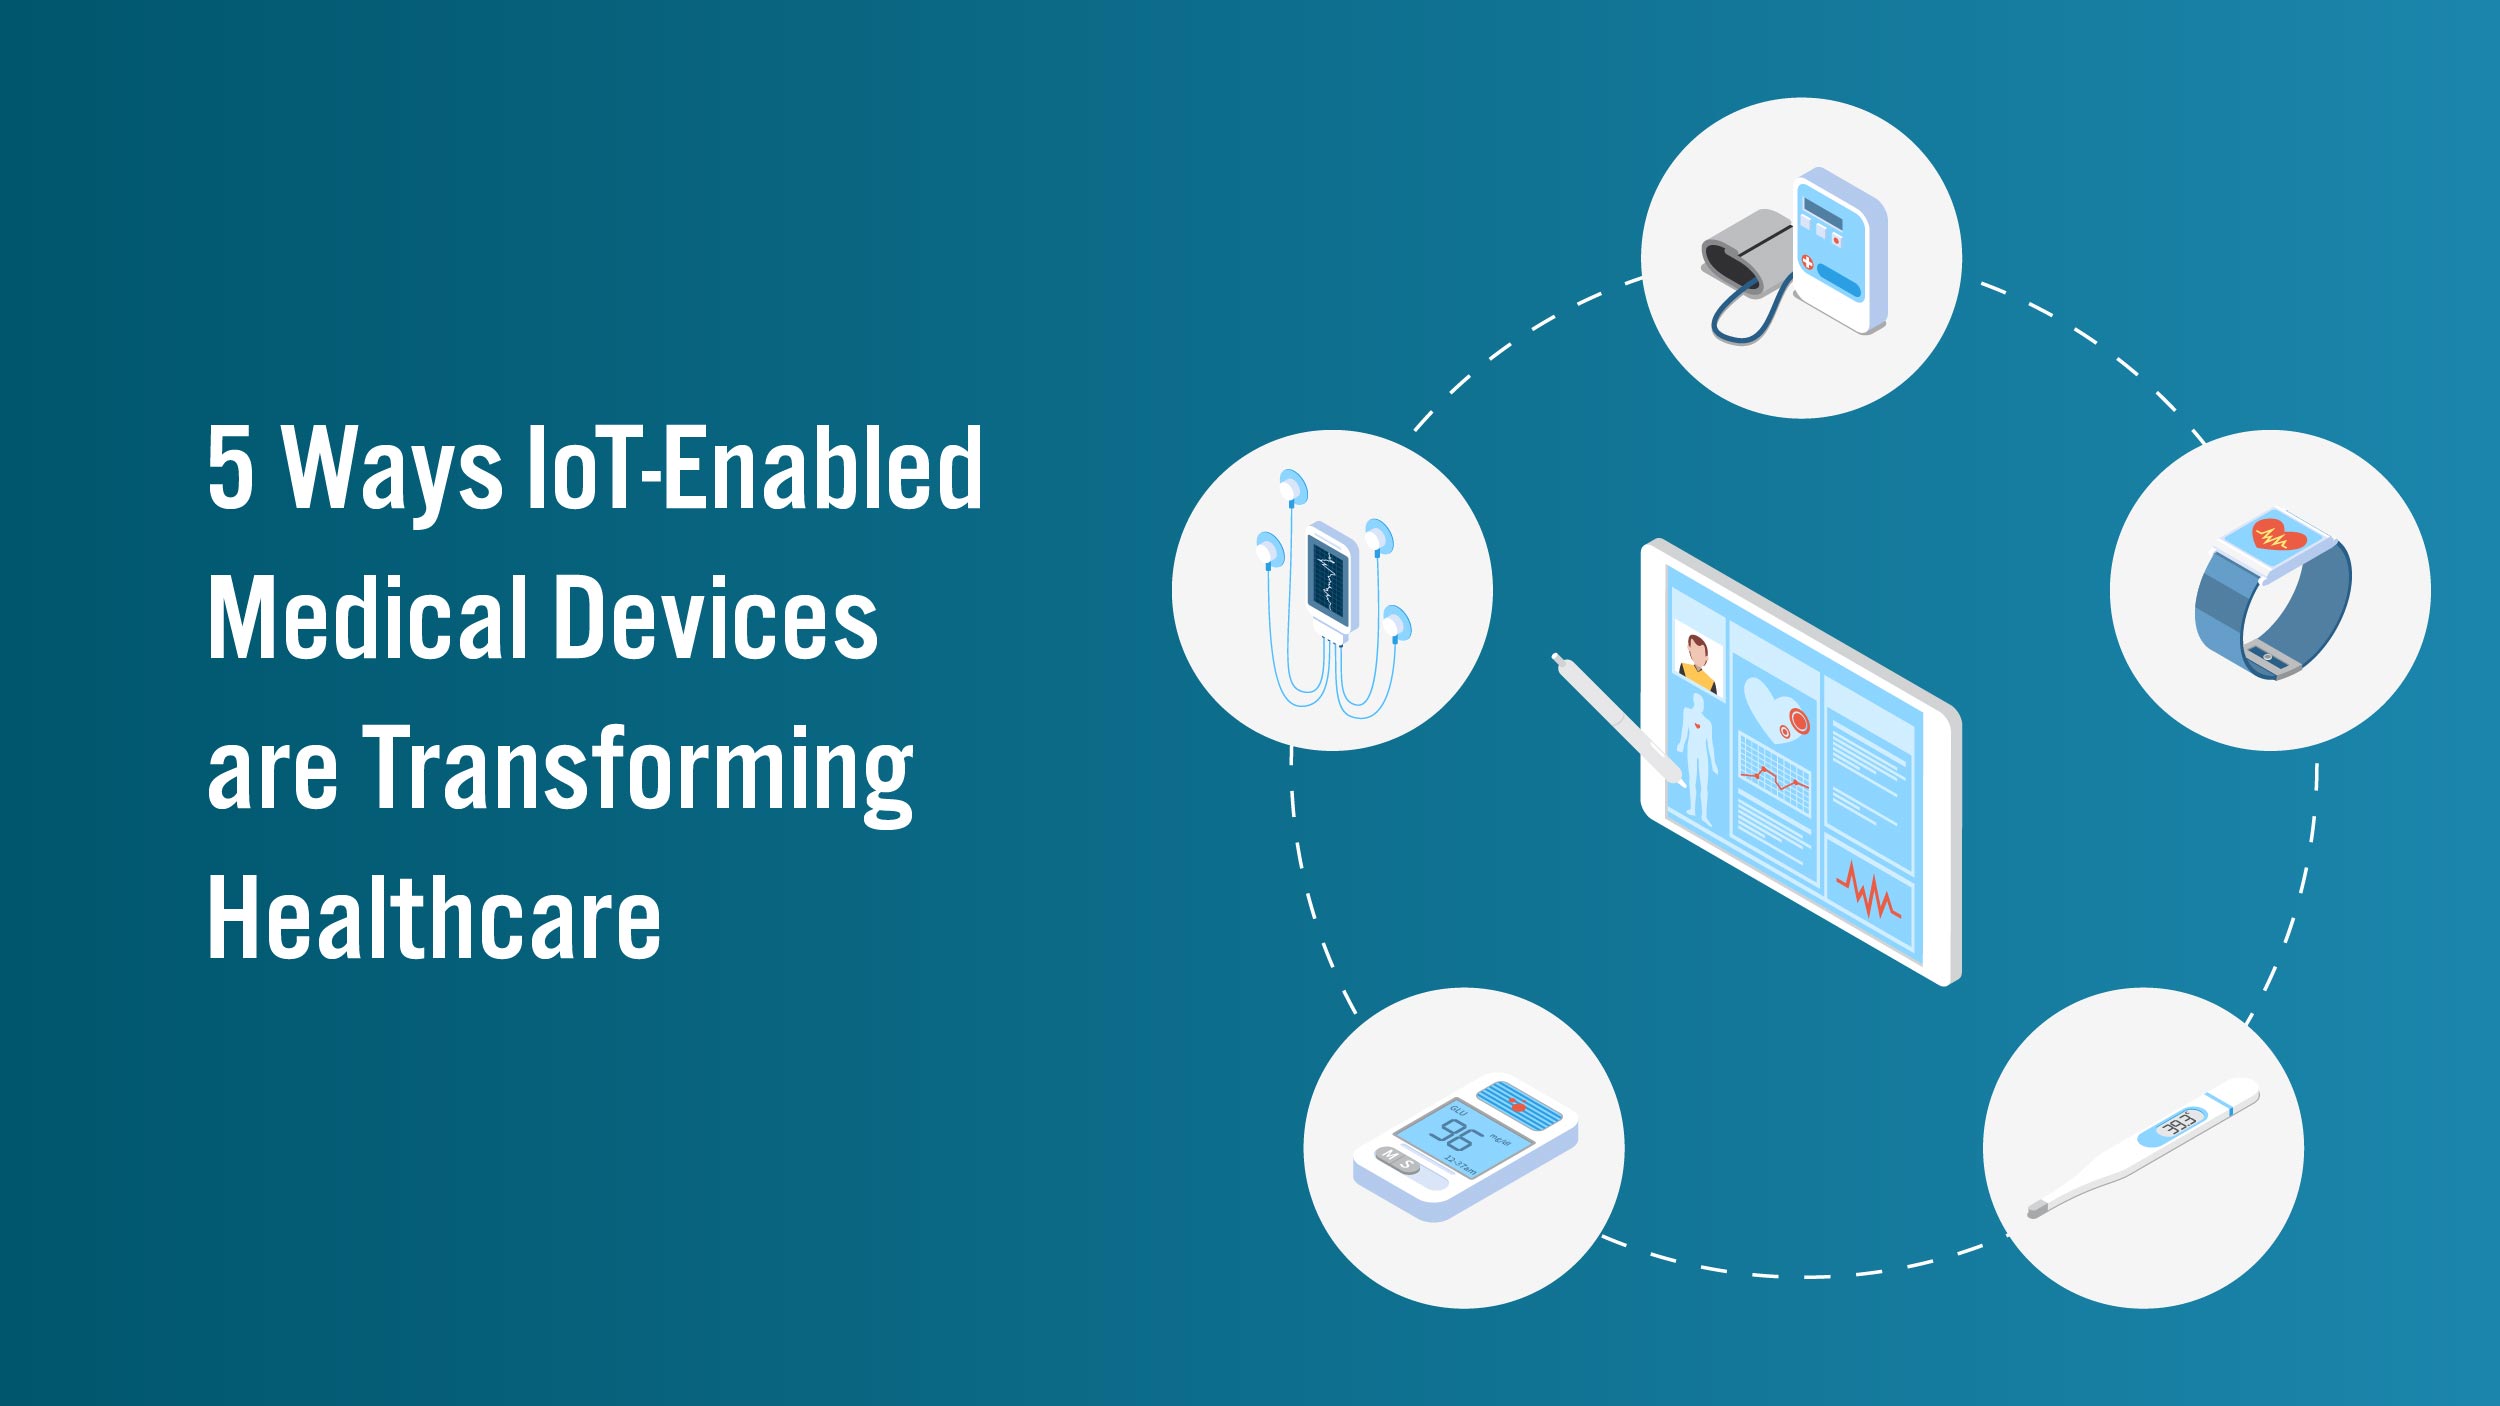 IoT-Enabled Medical Devices